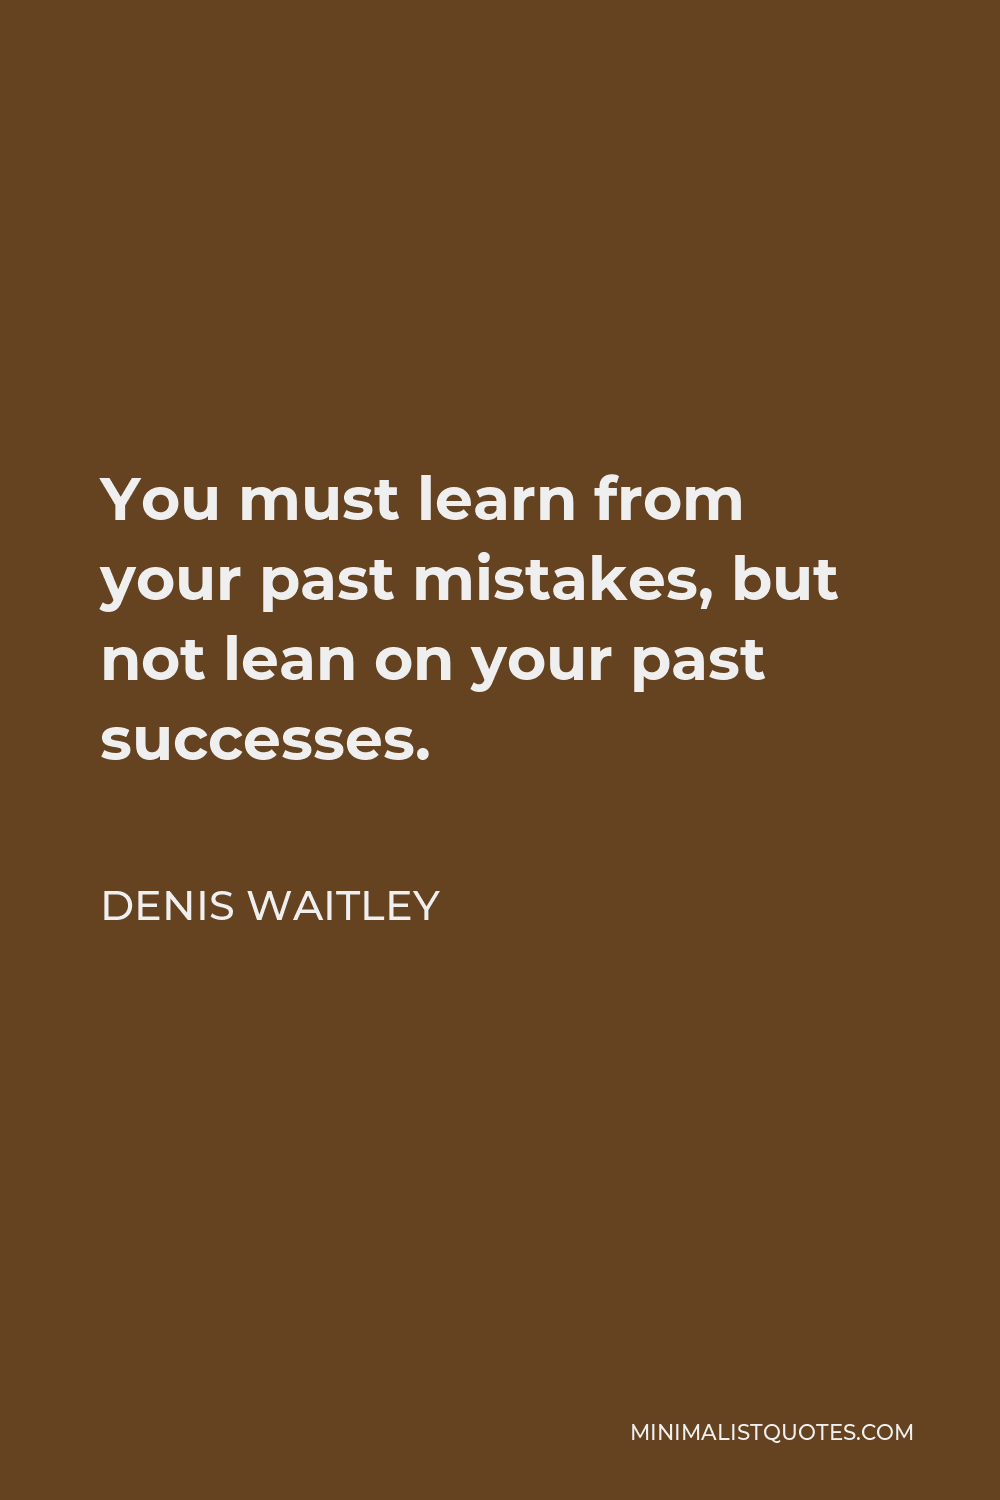 Denis Waitley Quote - You must learn from your past mistakes, but not lean on your past successes.